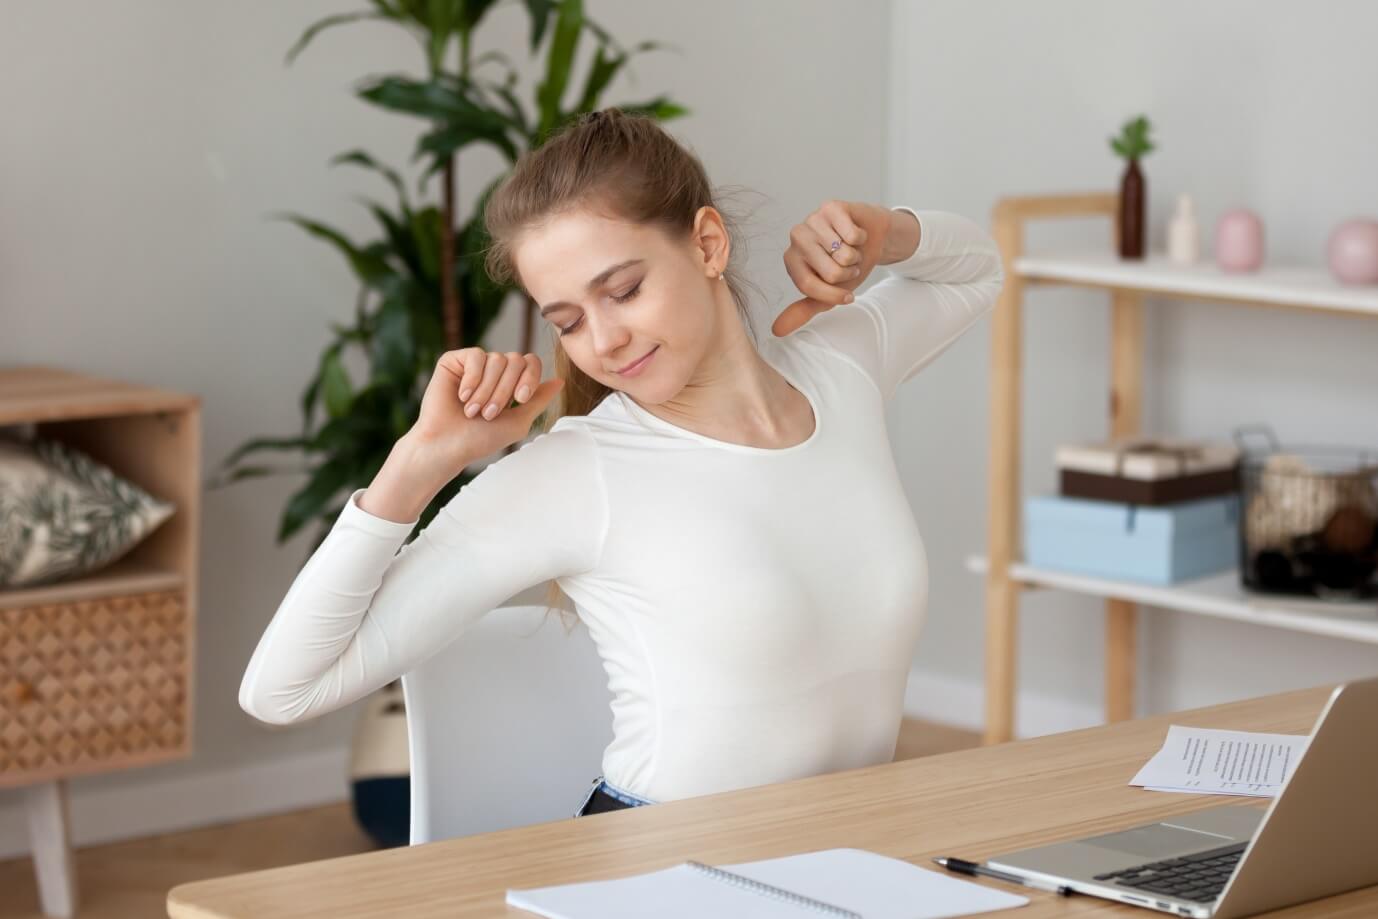 Woman sitting at desk stretching.